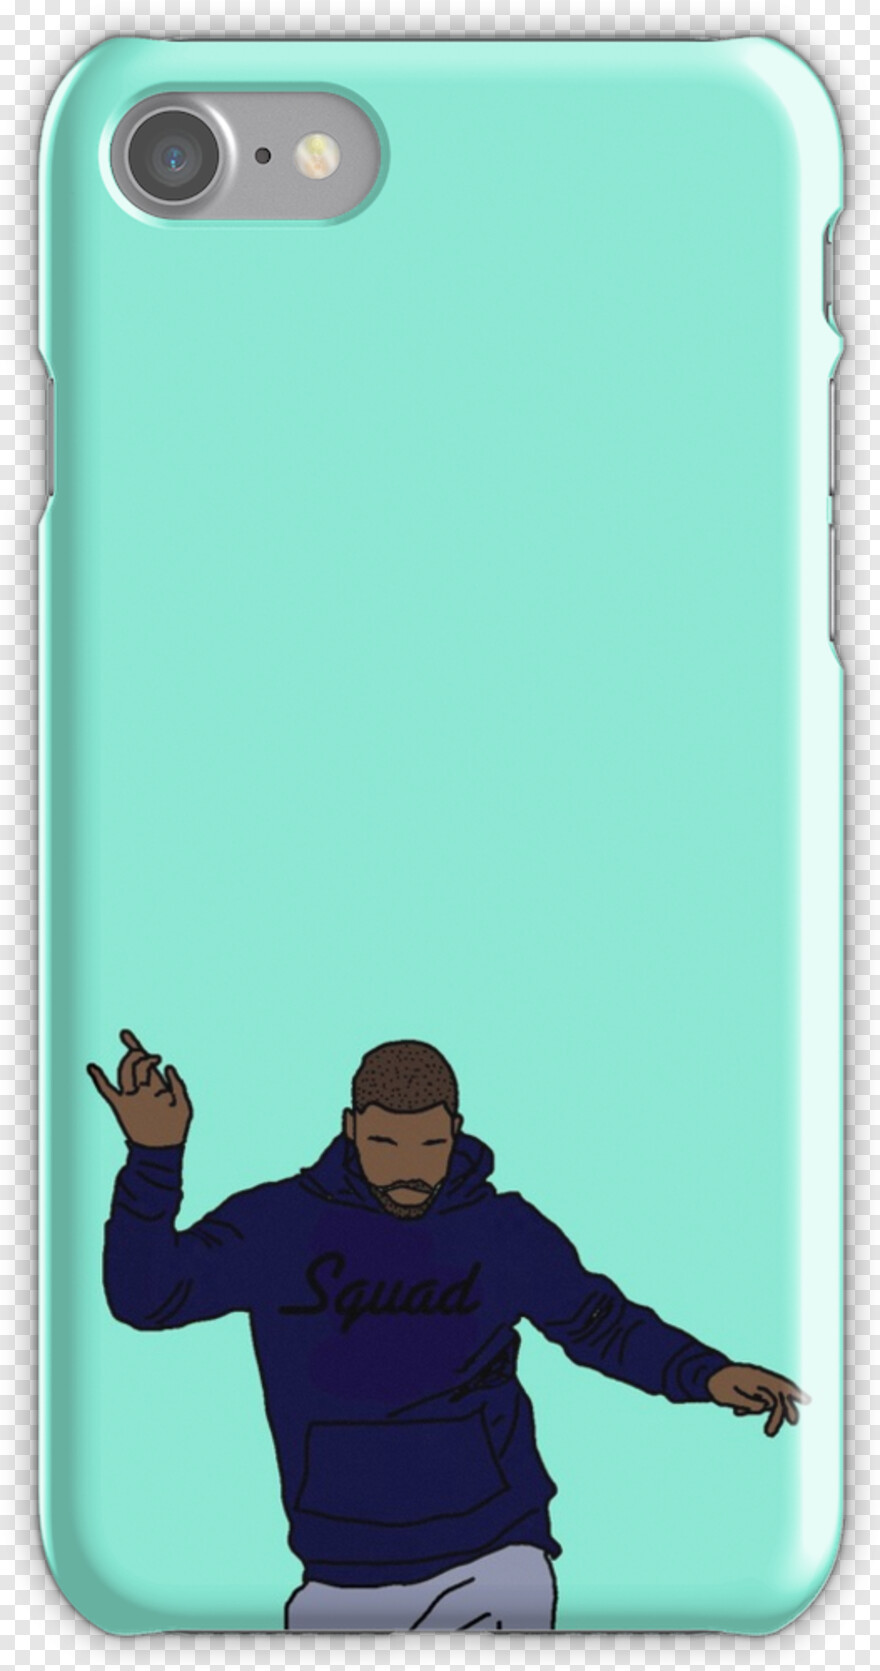  Hand Holding Iphone, Iphone 6s, Iphone 6 Transparent, Iphone Emojis, Hotline Bling, Iphone